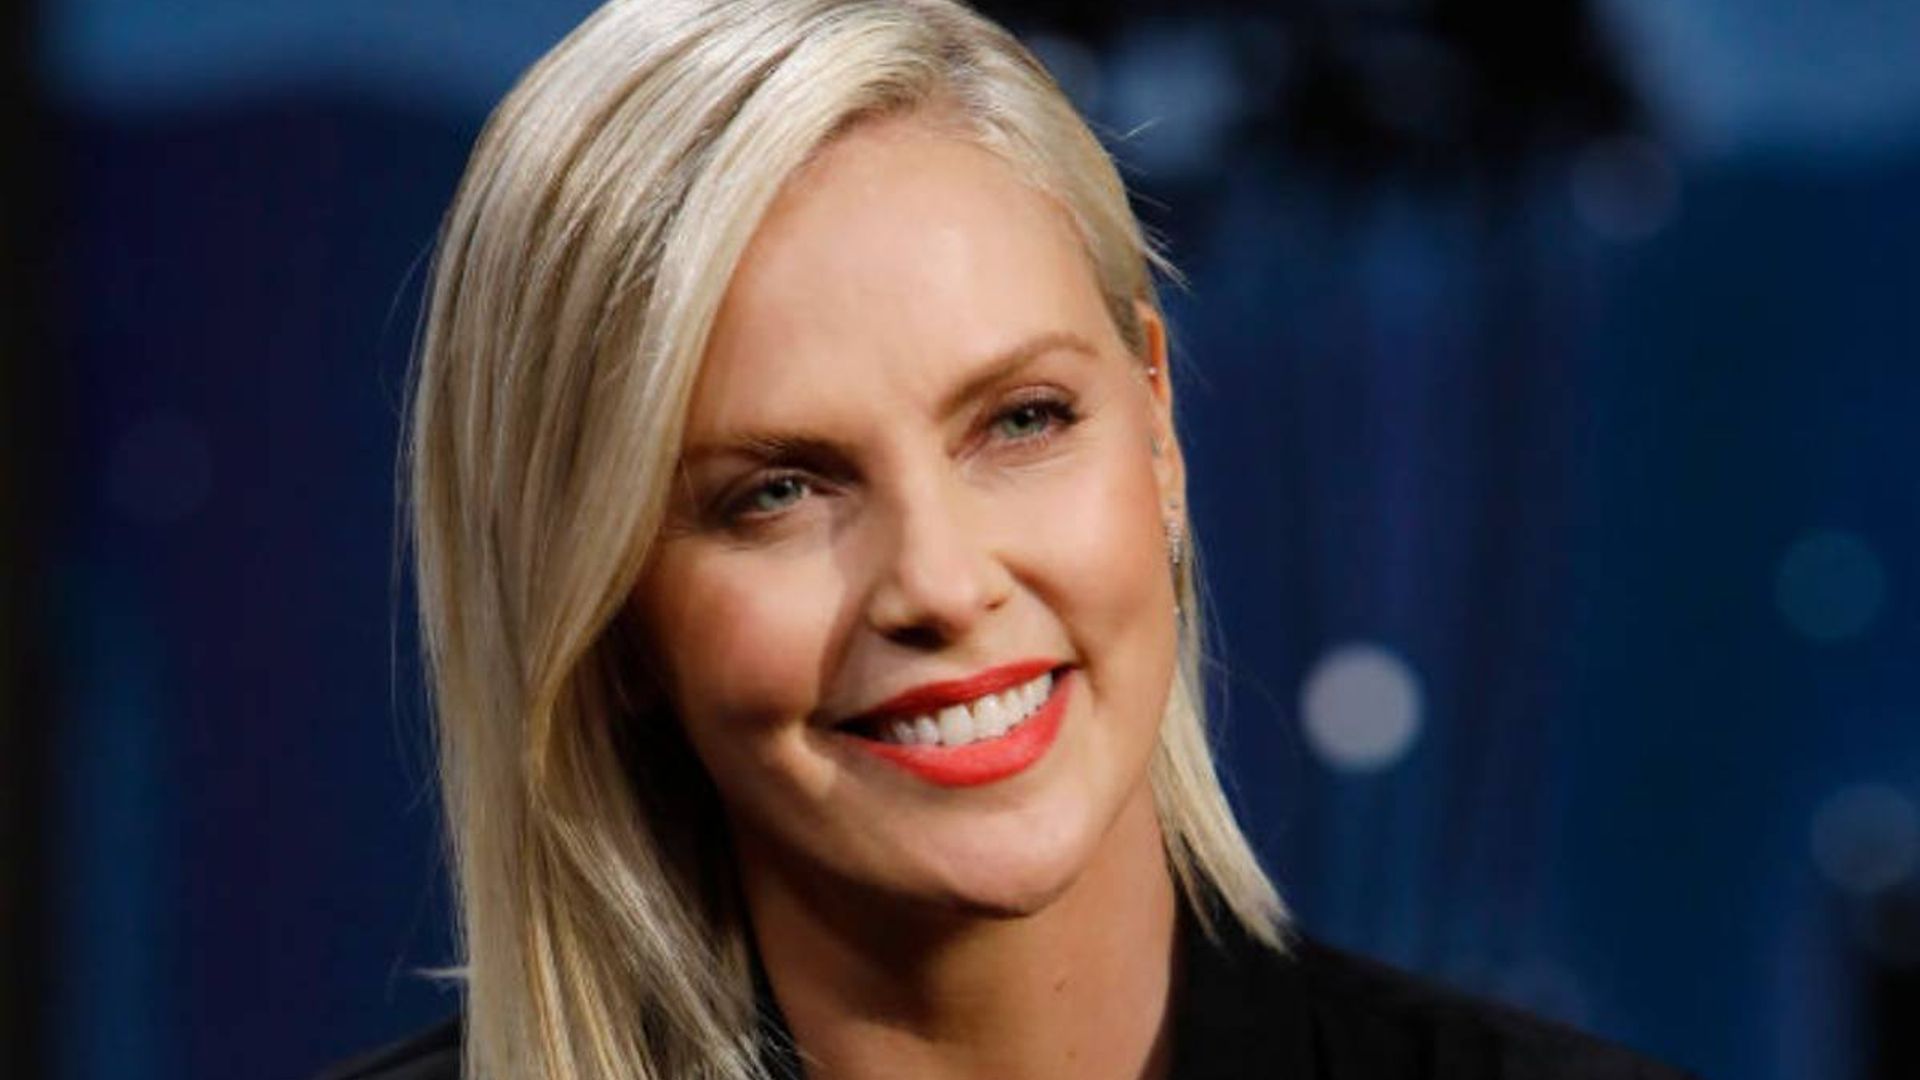 charlize theron smiling daughter photo